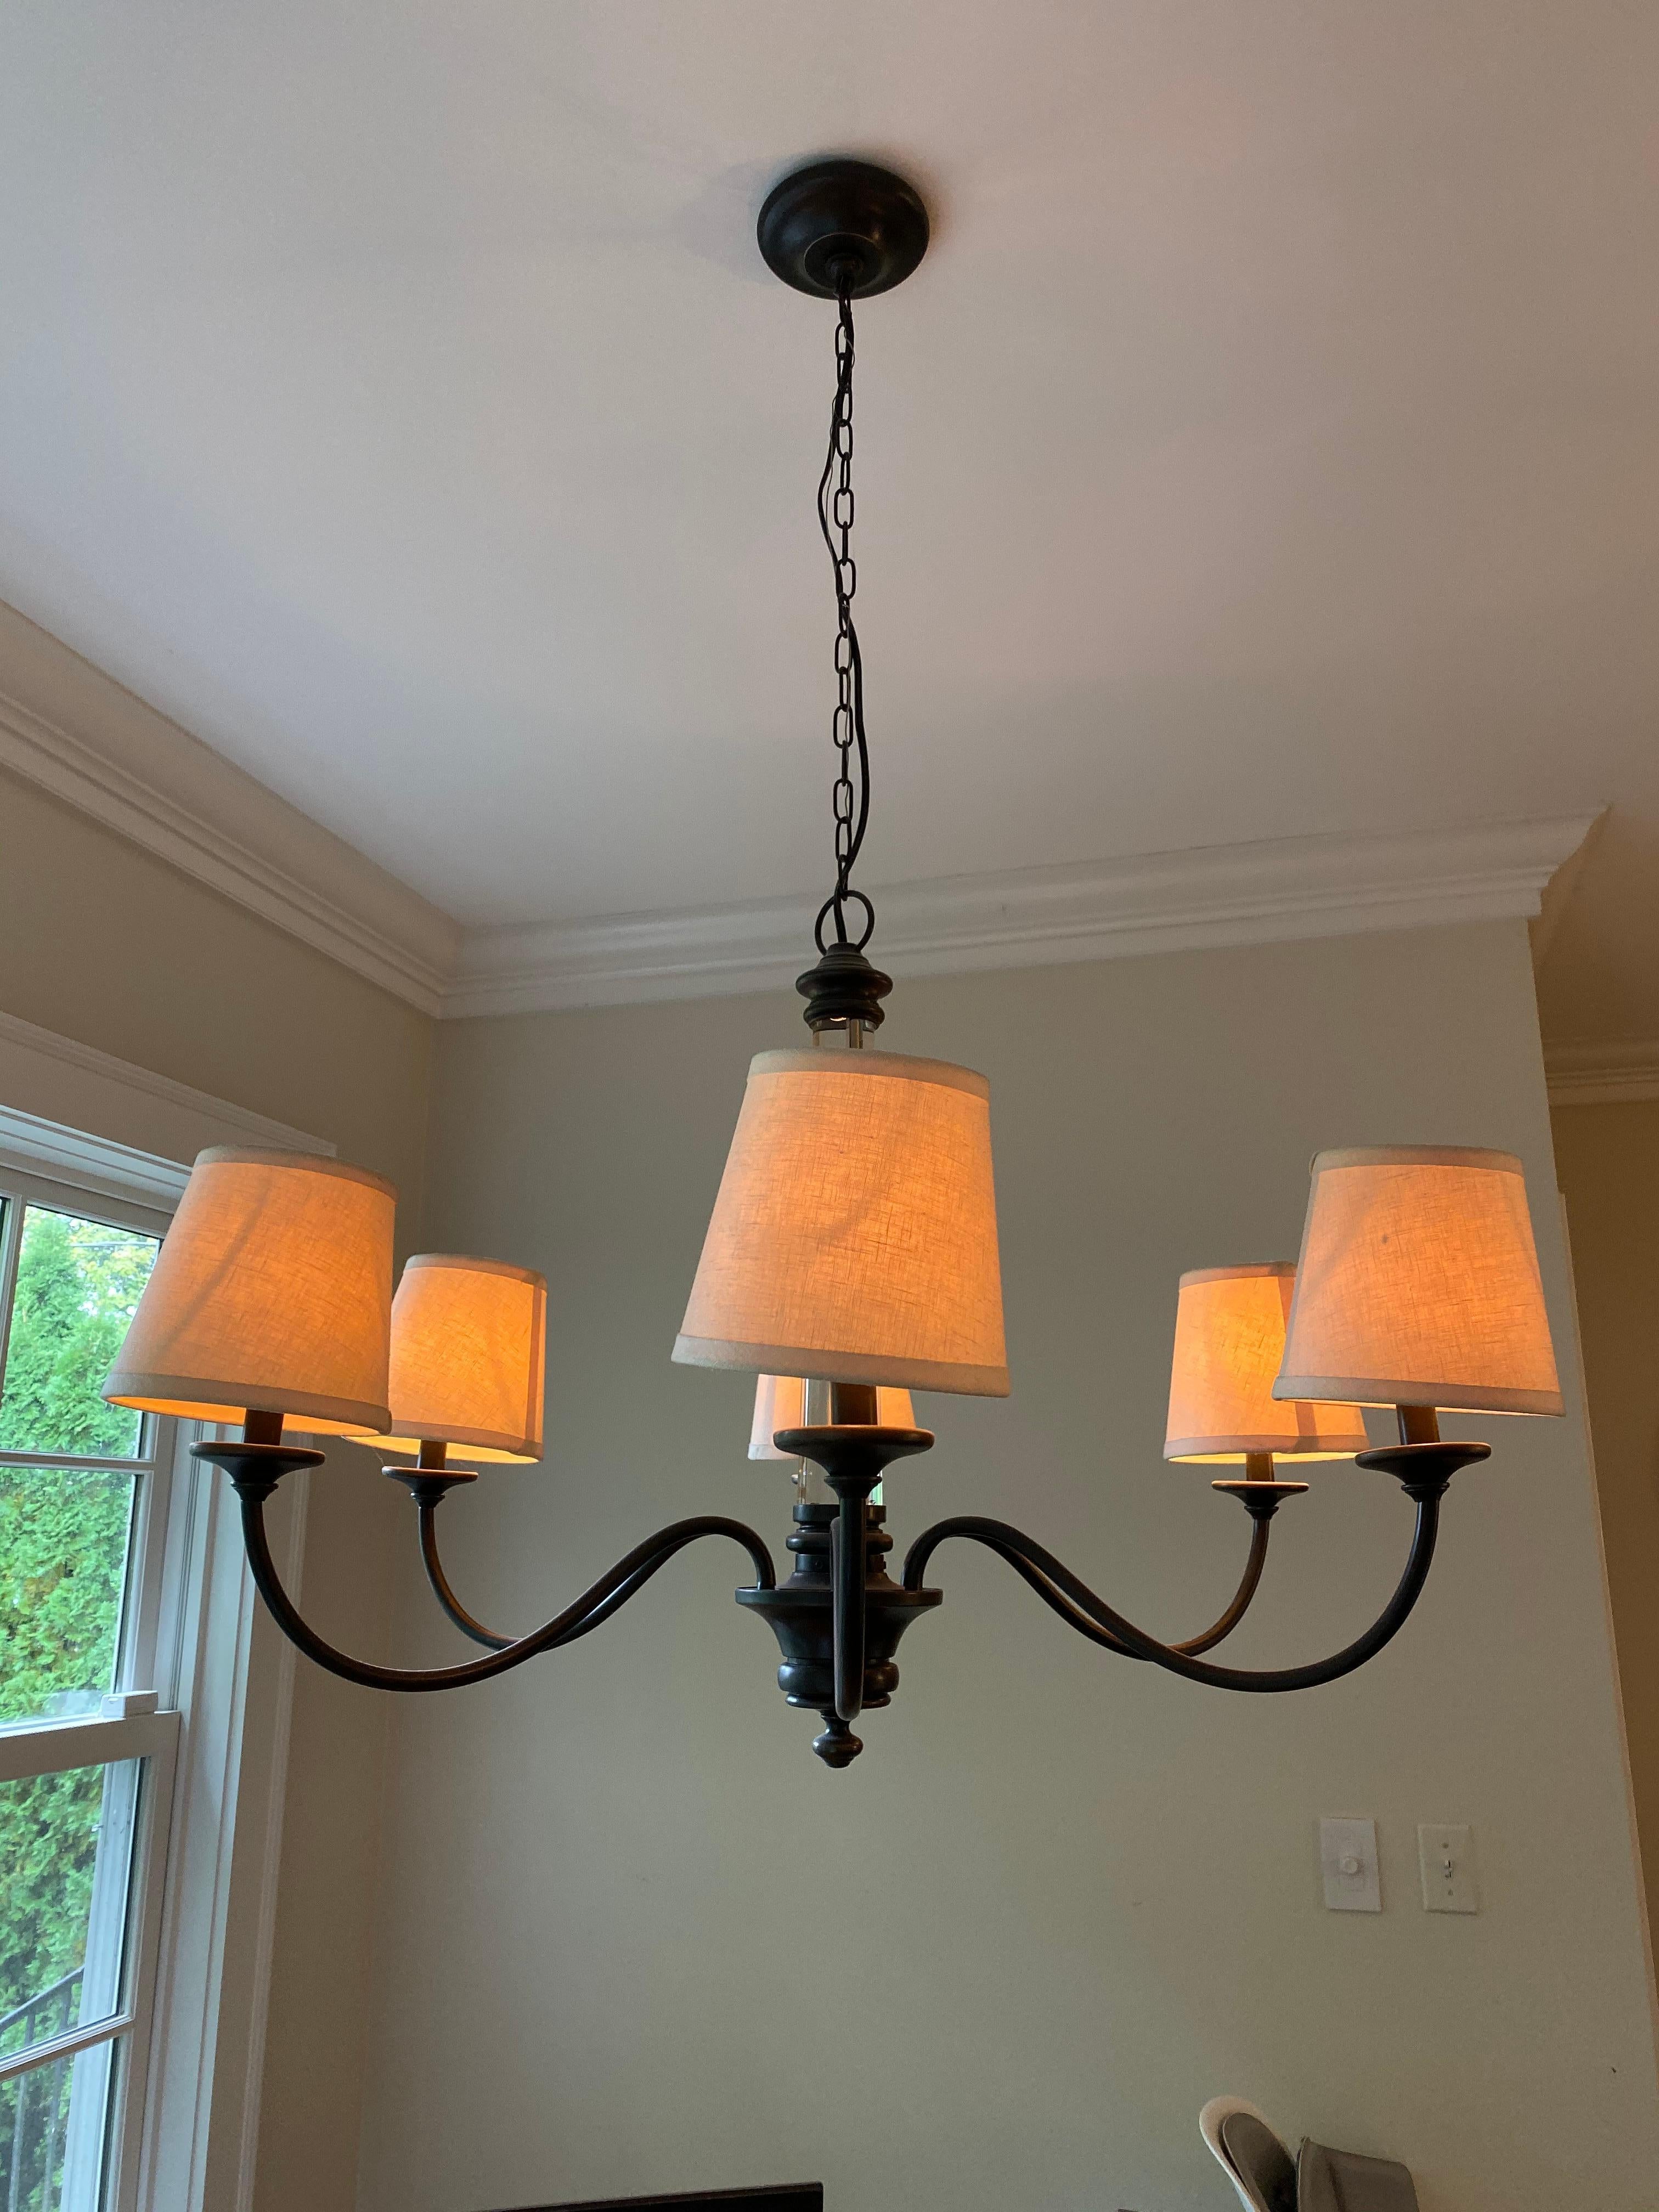 Graceful arms, clear iconic column, forged iron finish, natural linen shades
this farmhouse or rustic 6-arm chandelier will look perfect over your kitchen or dining table,
just in time for the holidays!